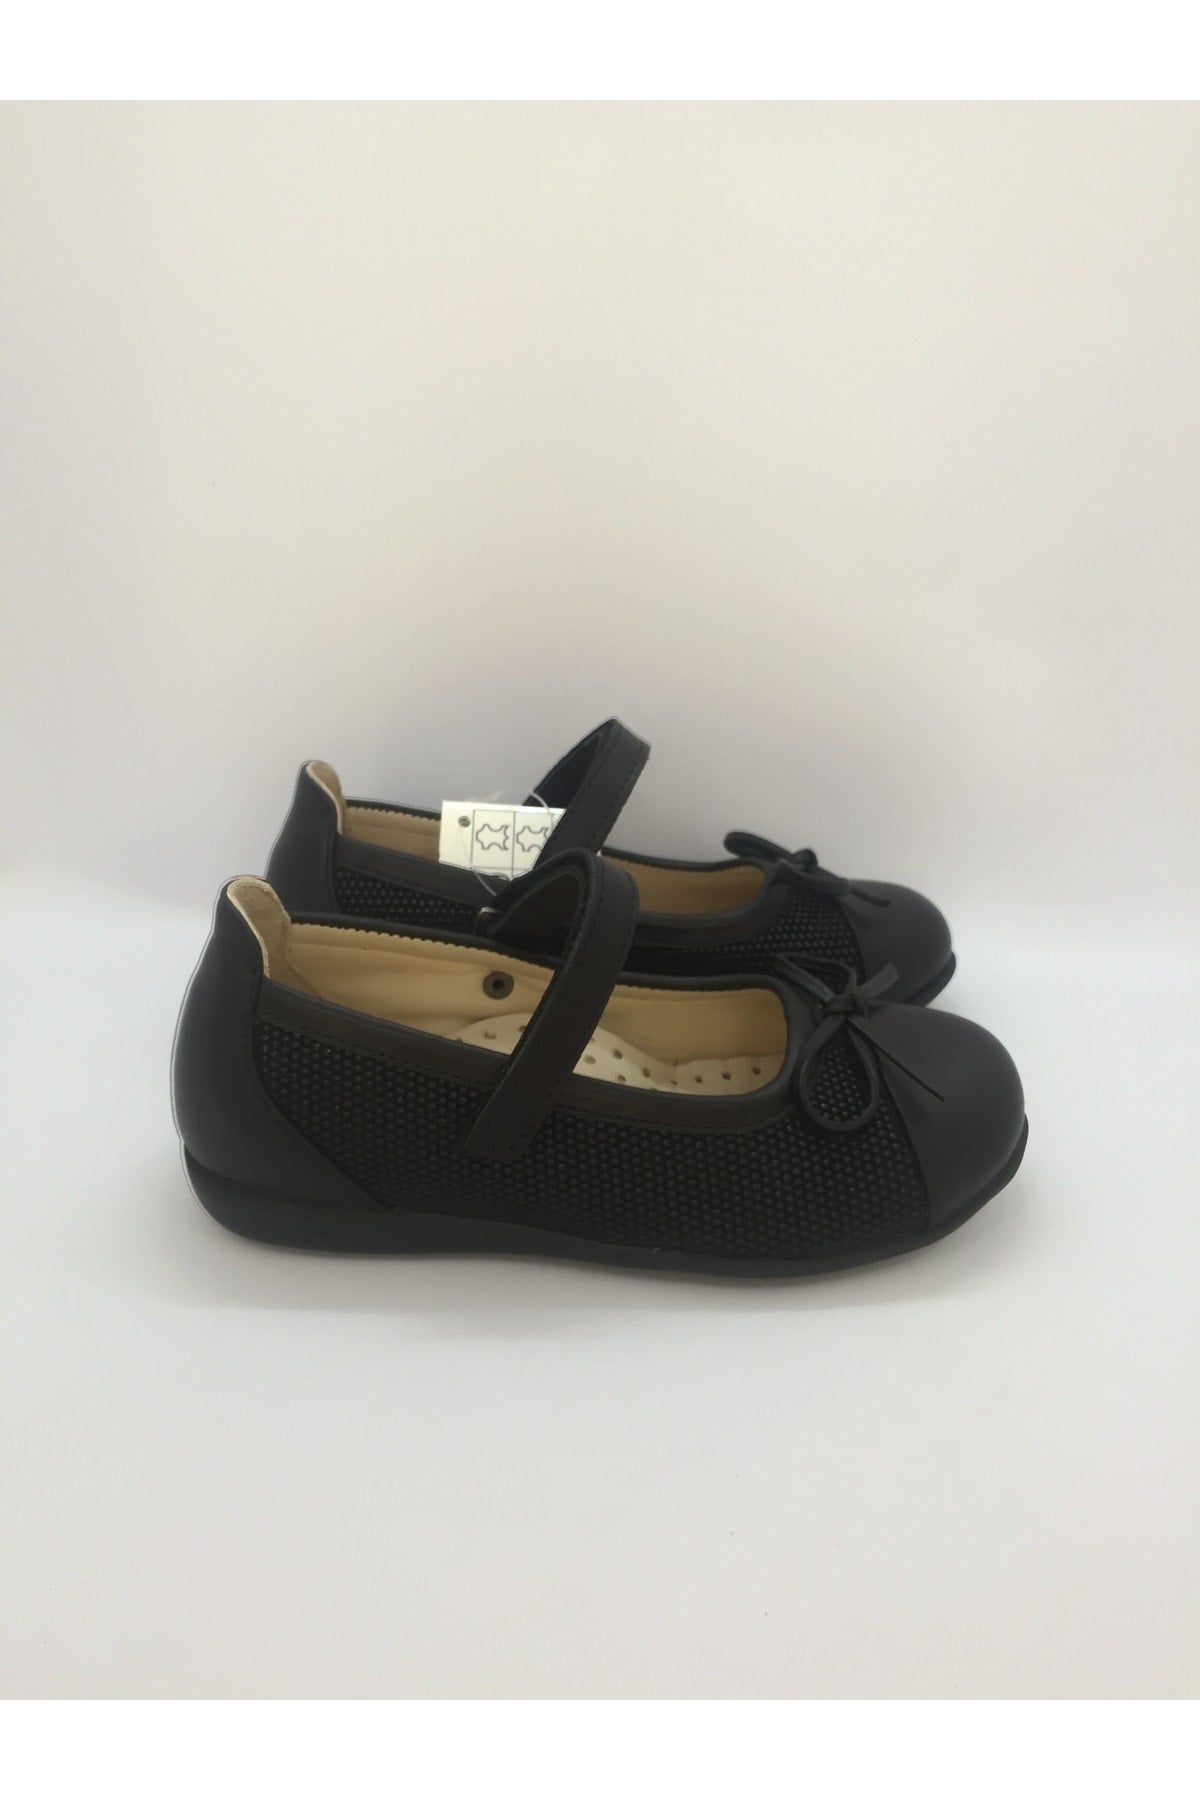 Orthopedic Kids Leather Flat Shoes 104 - Black Dotted